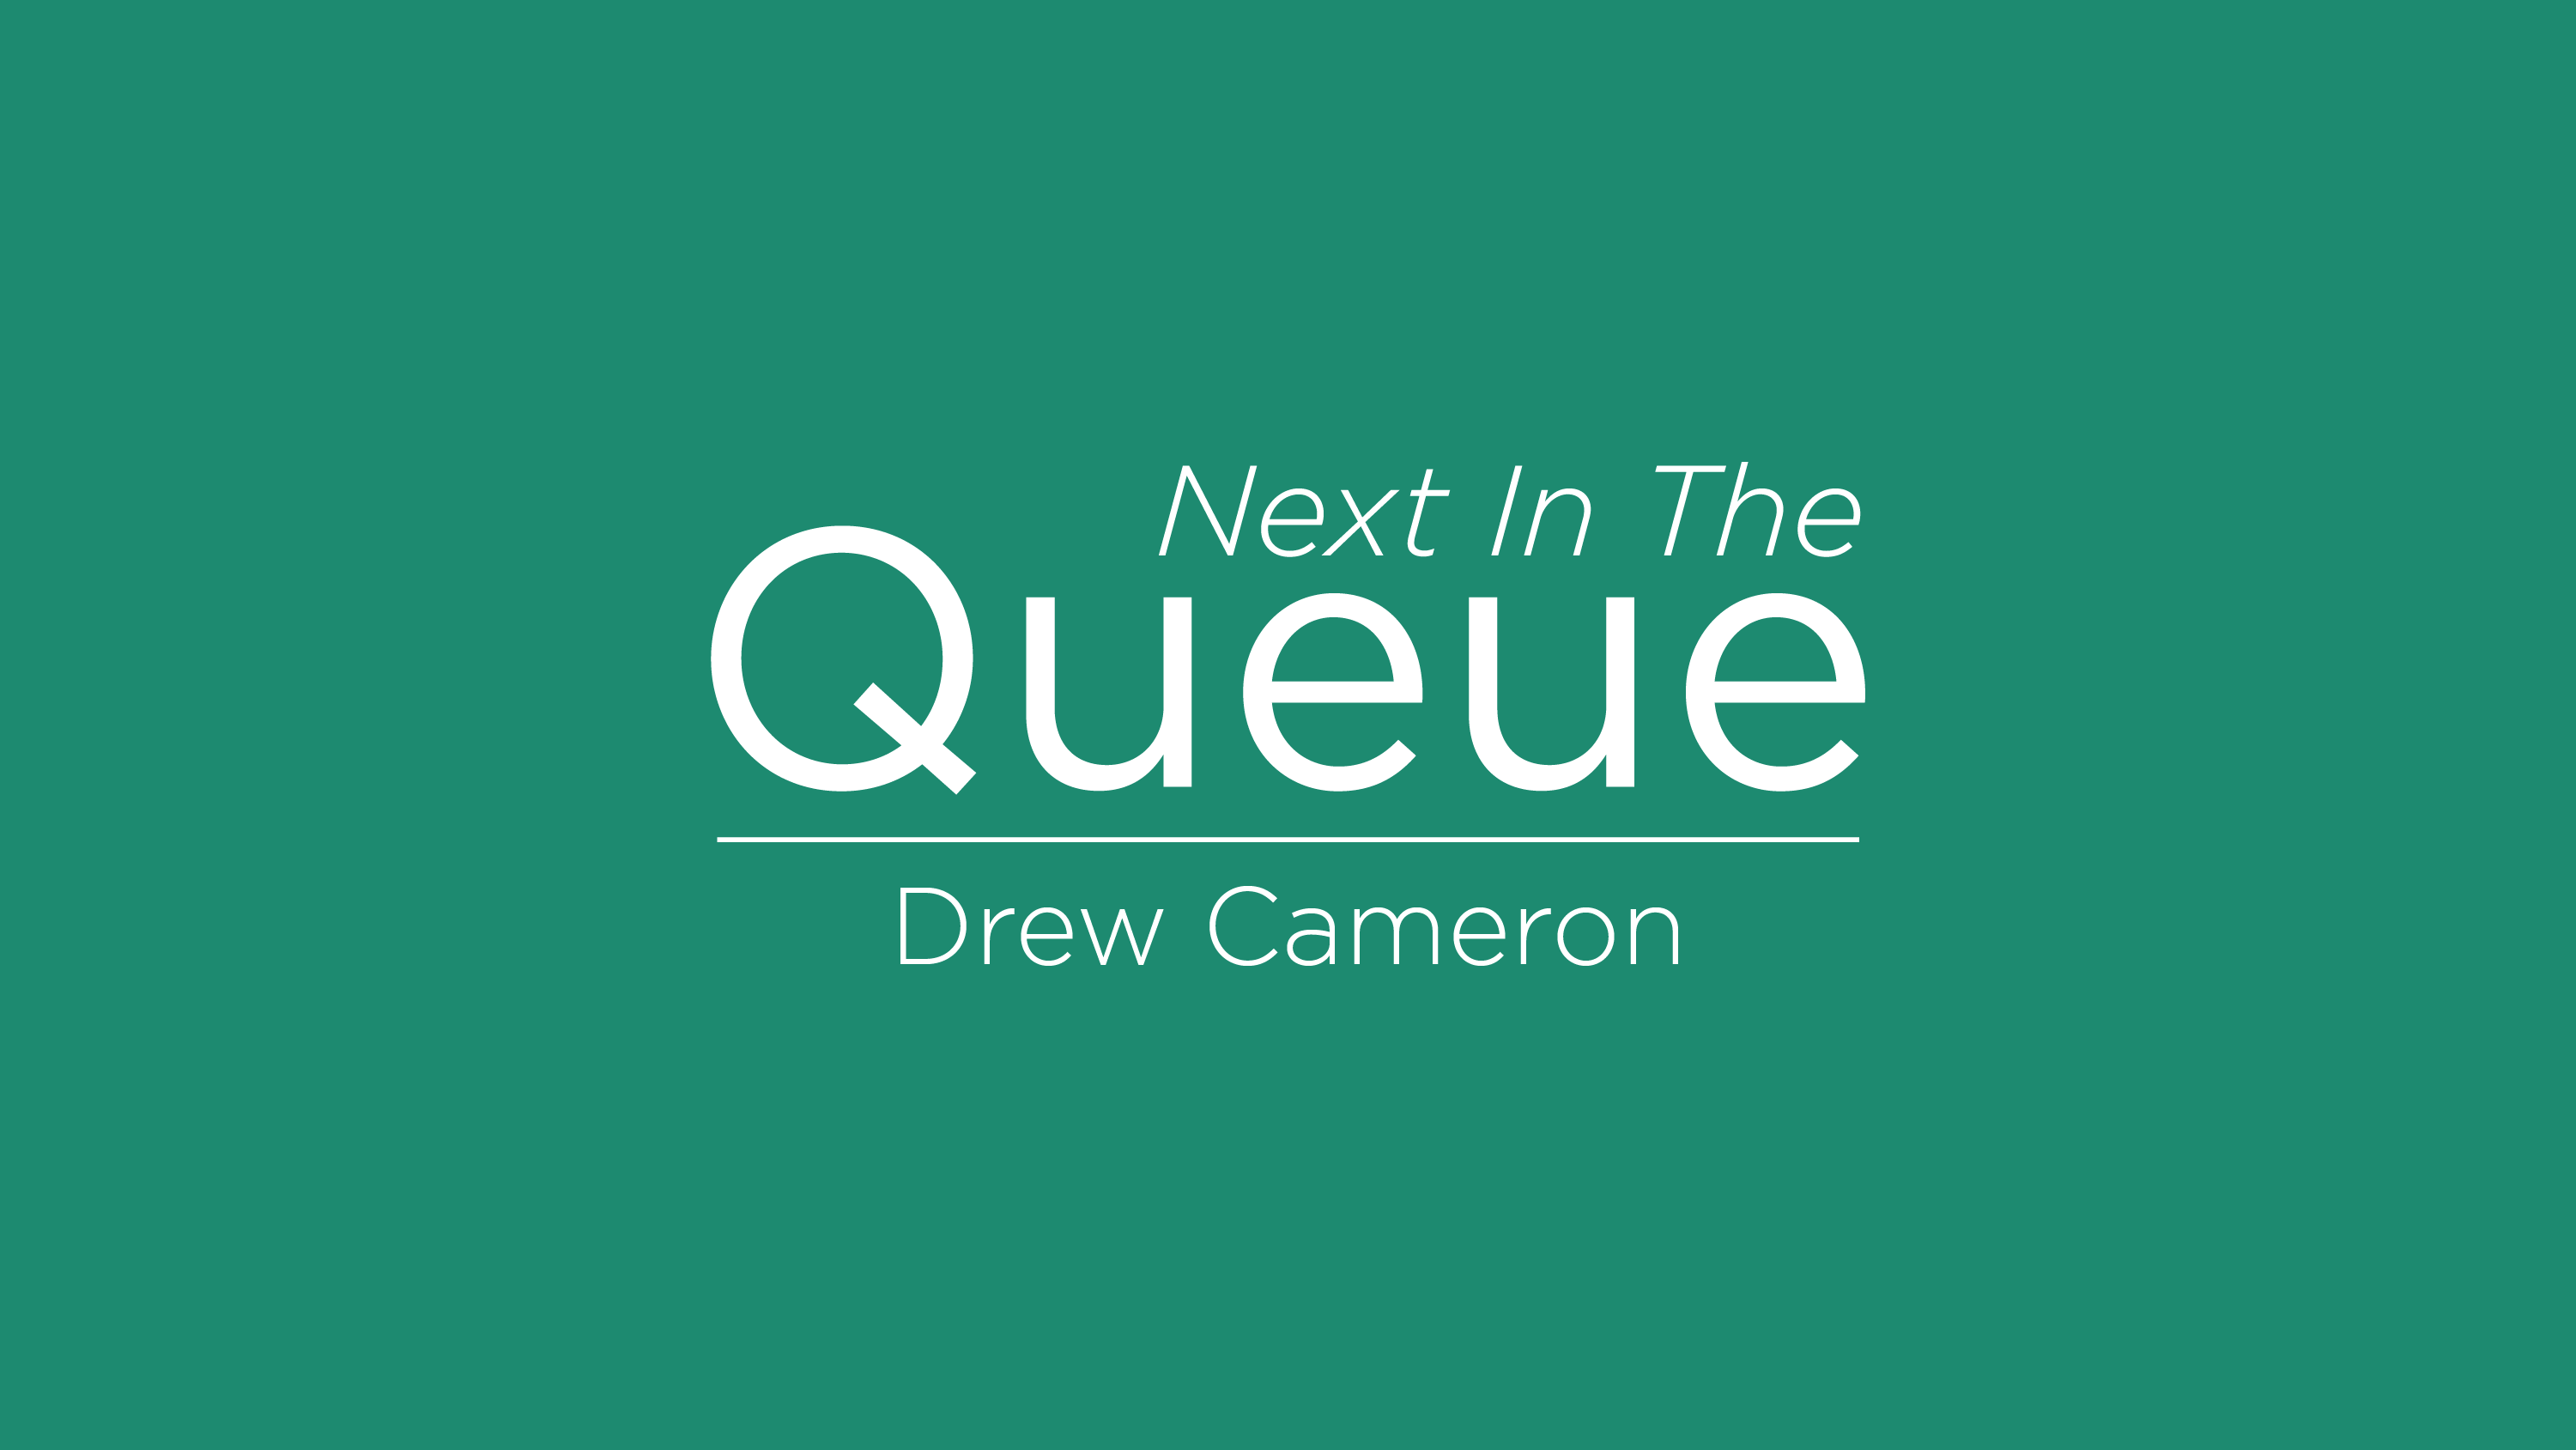 blog post cover graphic for The Queue featuring drew cameron